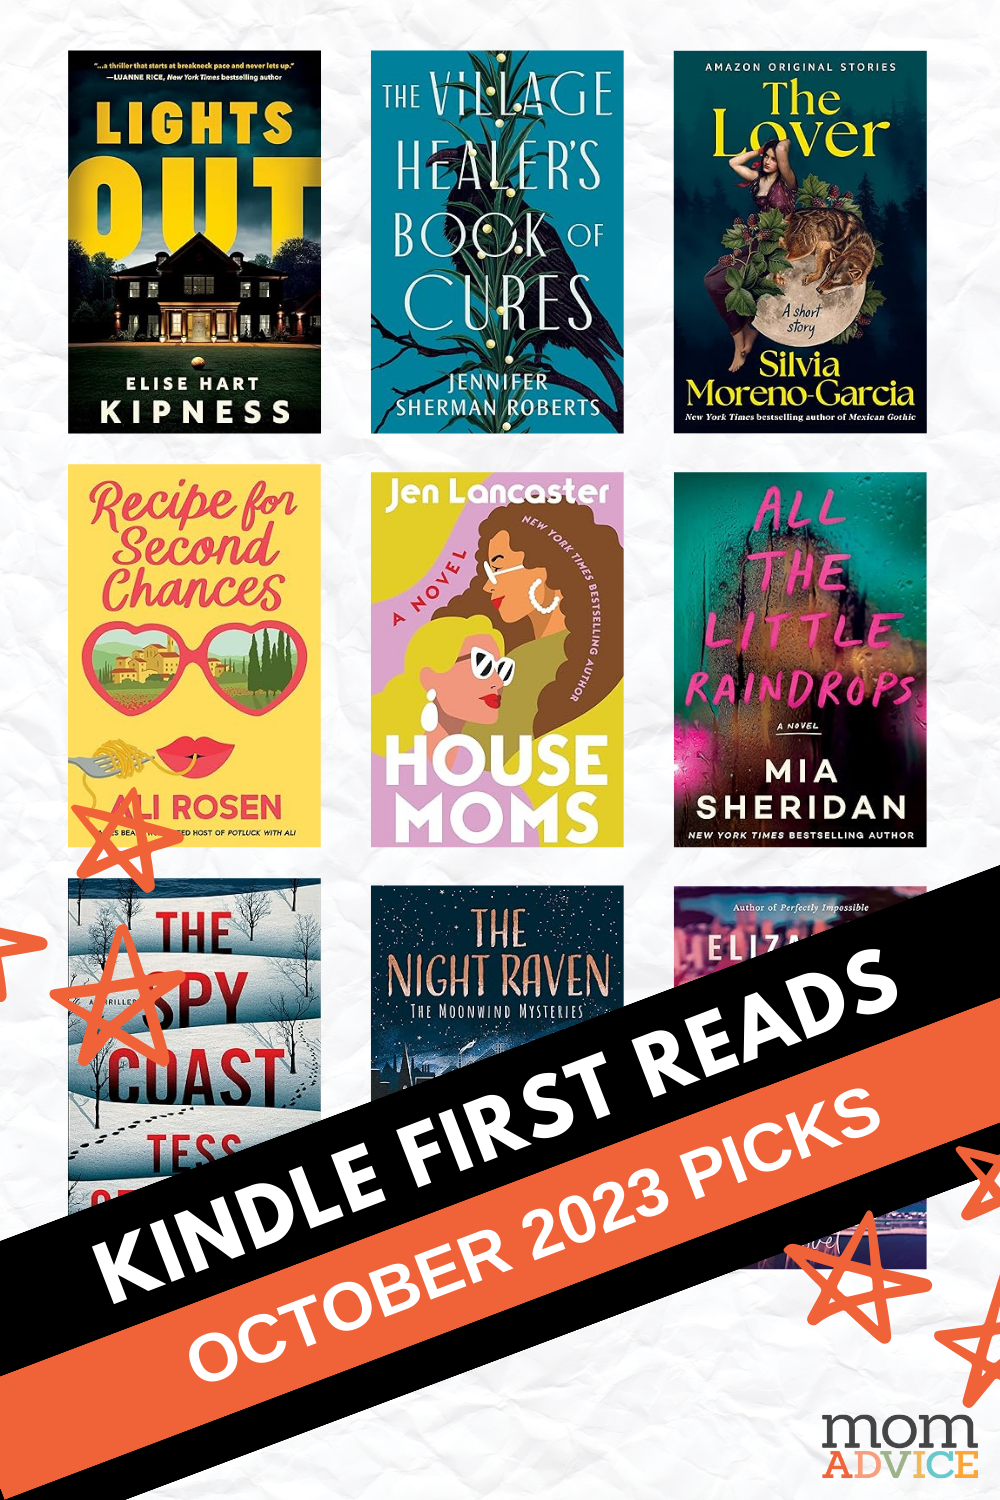 Amazon First Reads for October (Get TWO FREE Books) MomAdvice